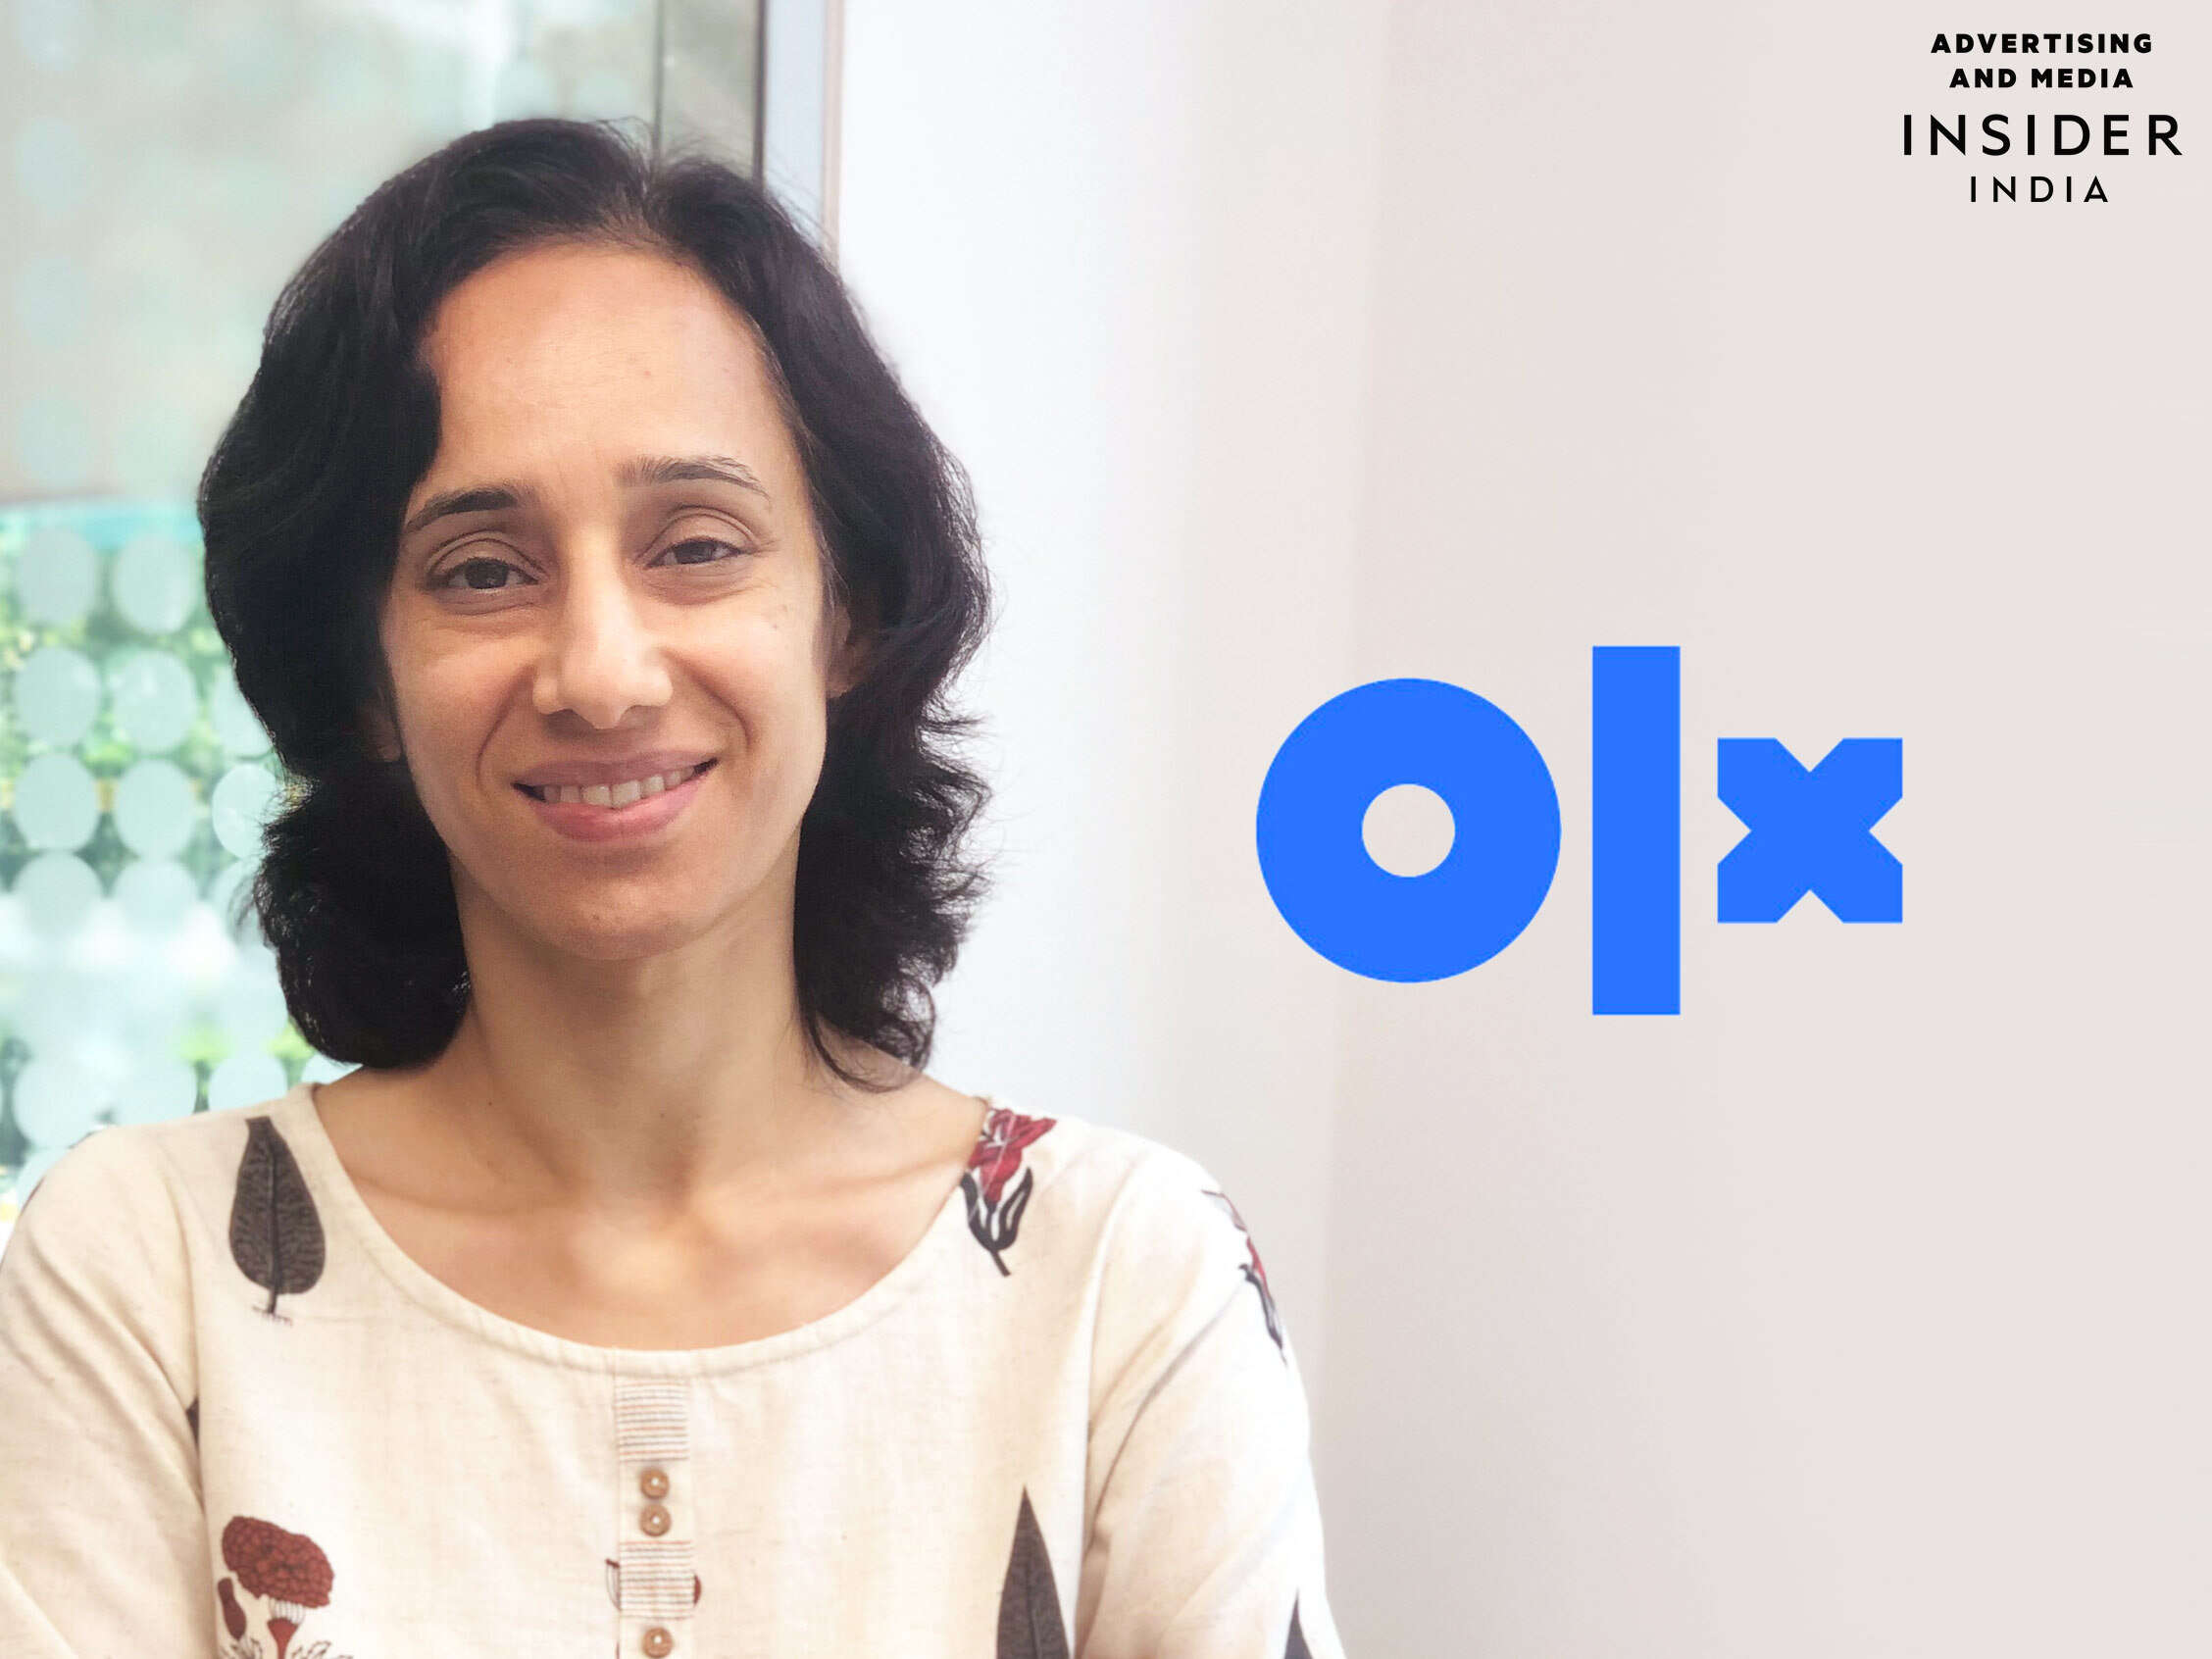 OLX India saw spike in demand for pre-owned goods in 2020